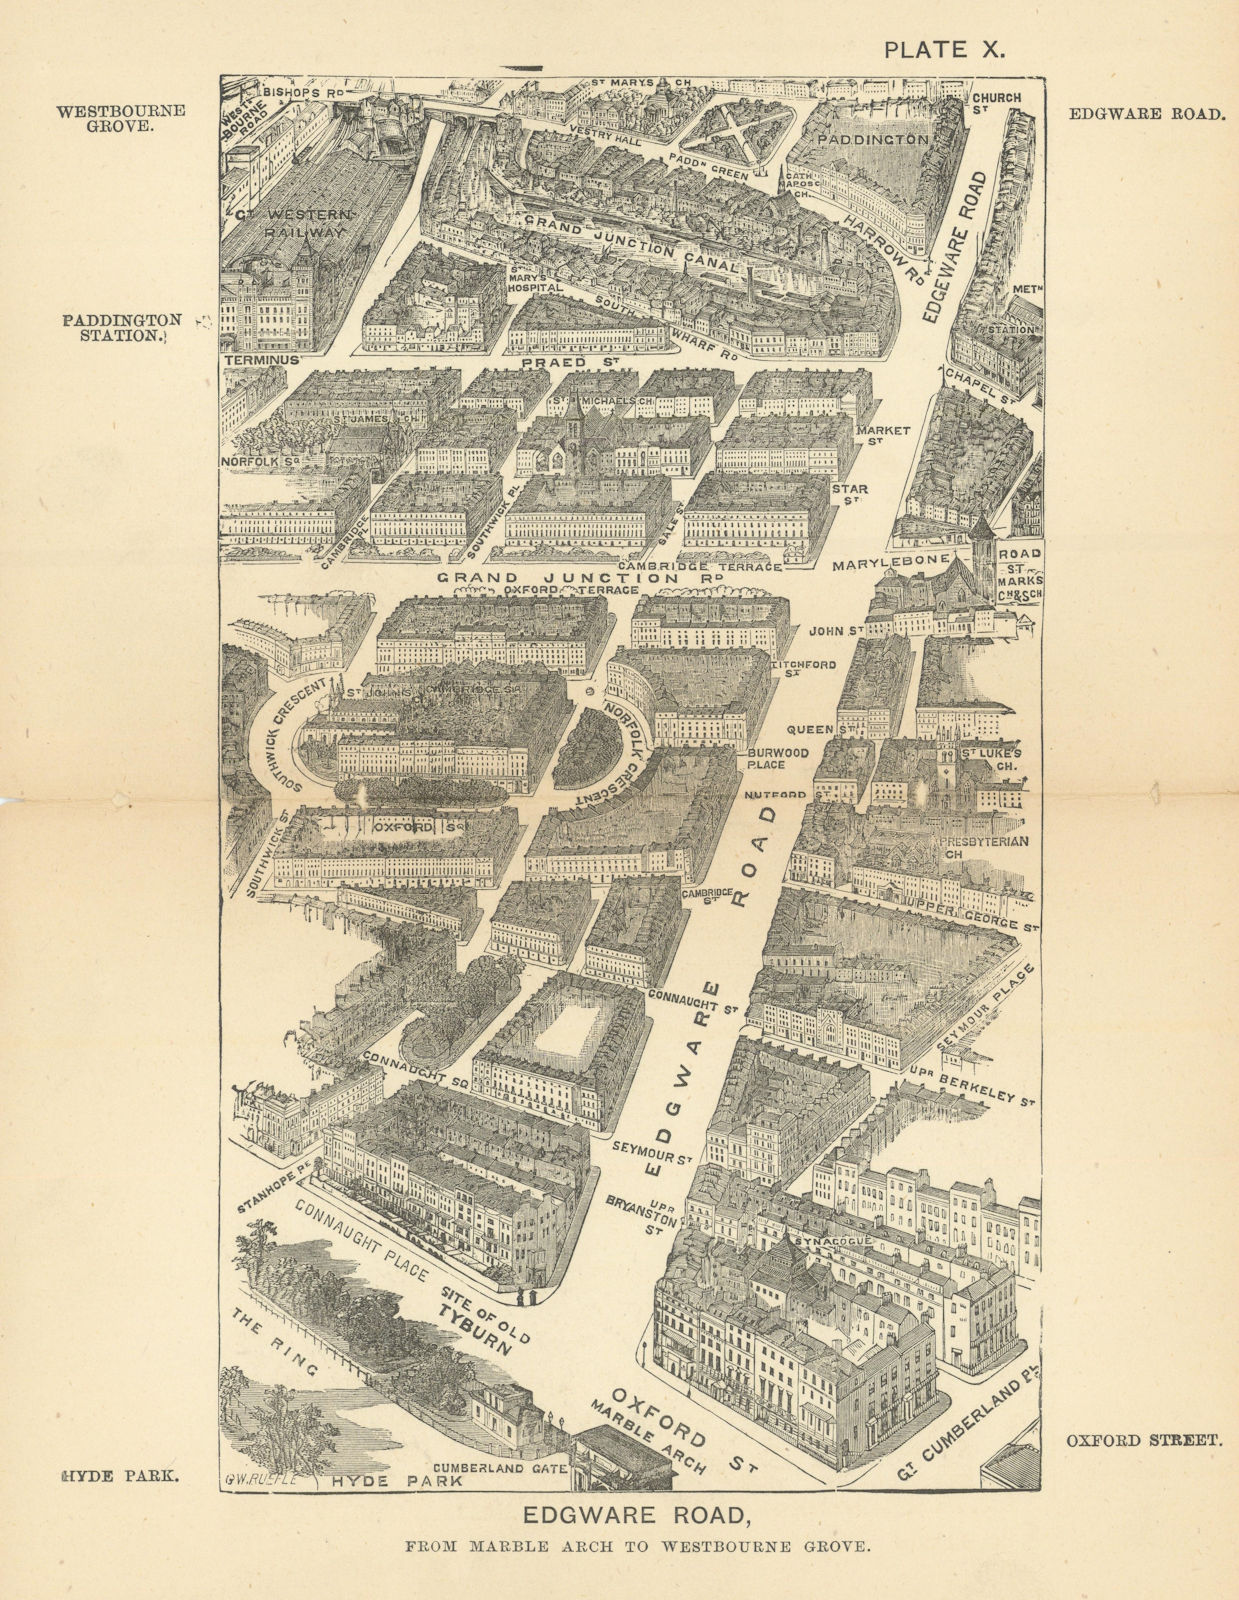 Associate Product Bird's eye view Edgware Road. Marble Arch to Westbourne Grove. SULMAN 1891 map